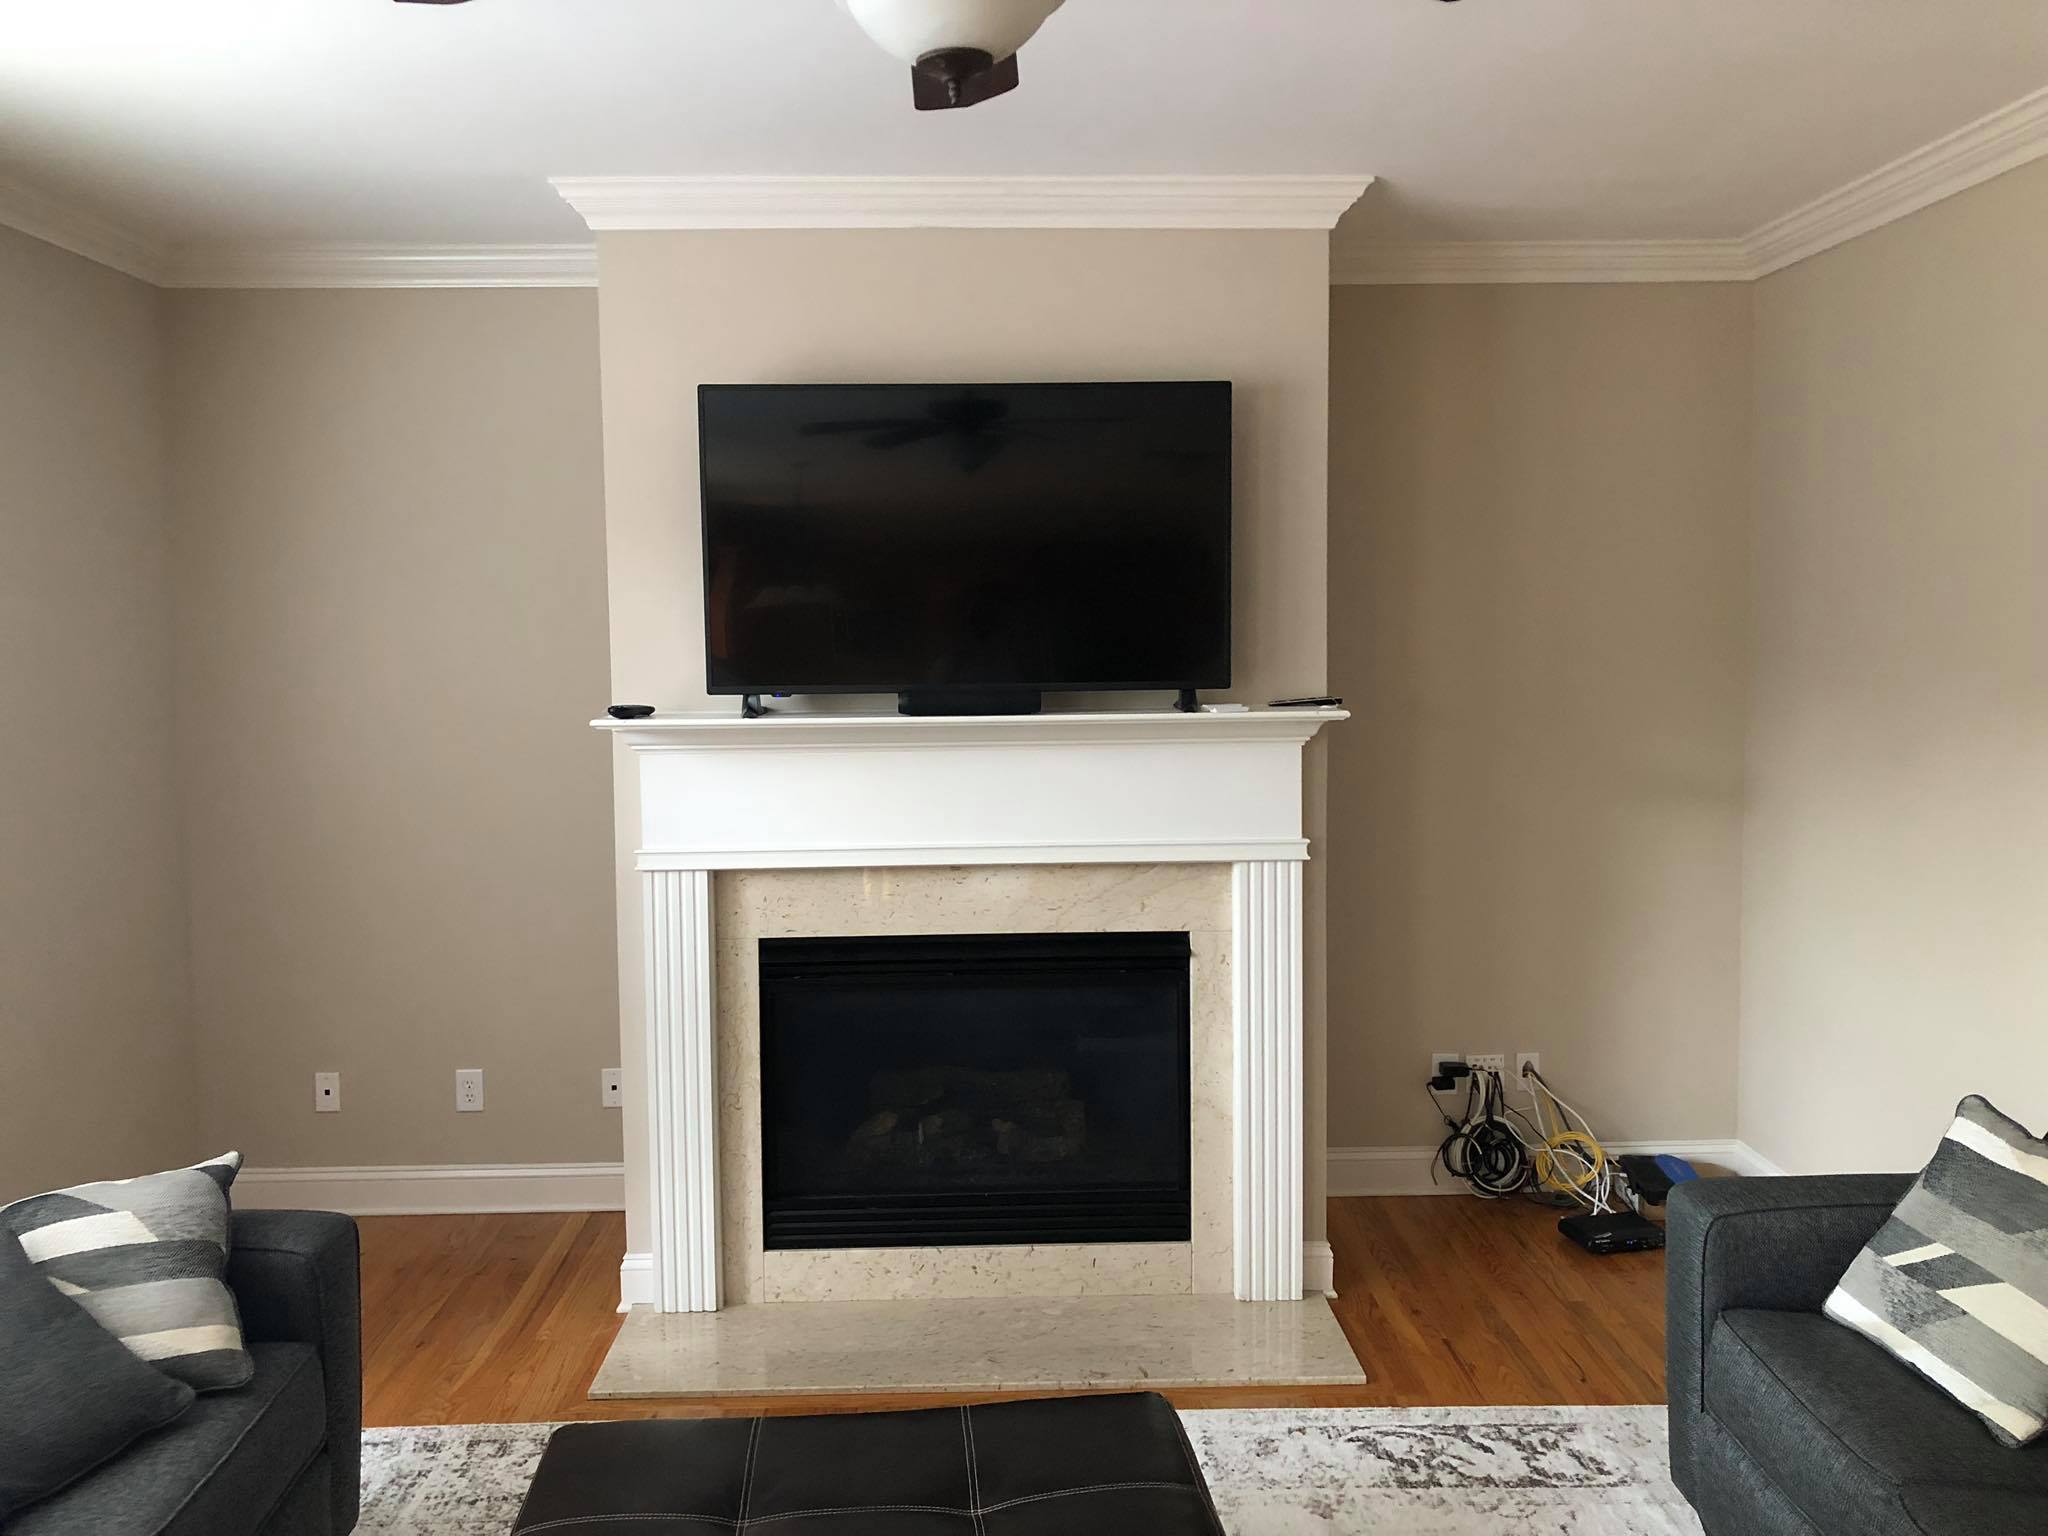 Fireplace Entertainment Center with Floating Shelves and Double Door Cabinets Front View 2